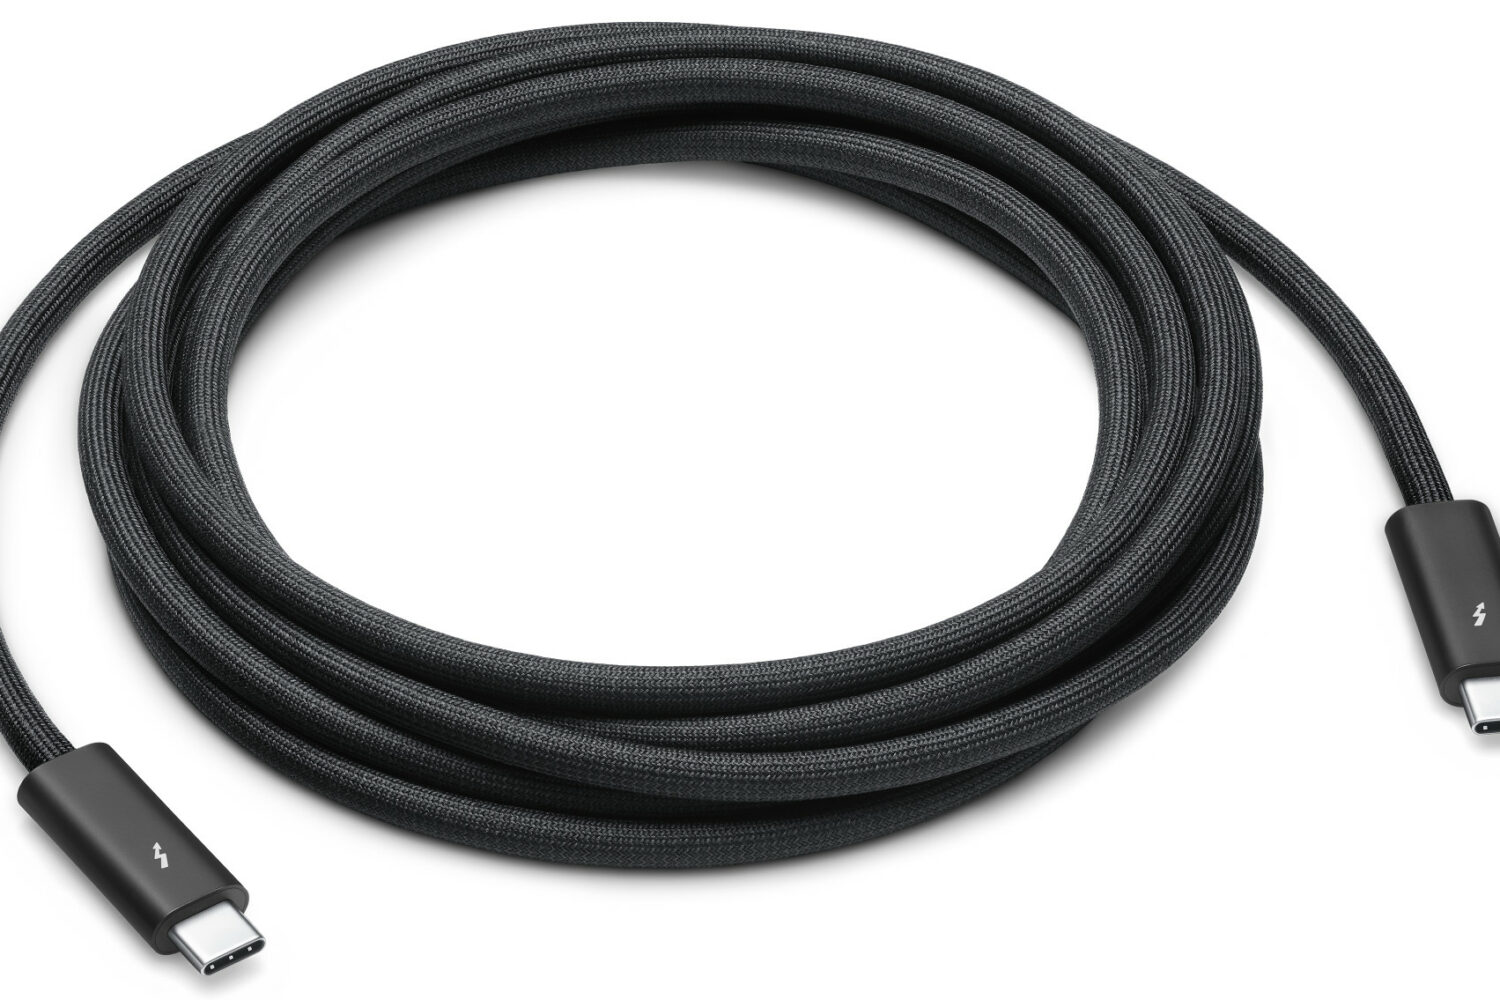 Apple's Thunderbolt Pro 4 cable